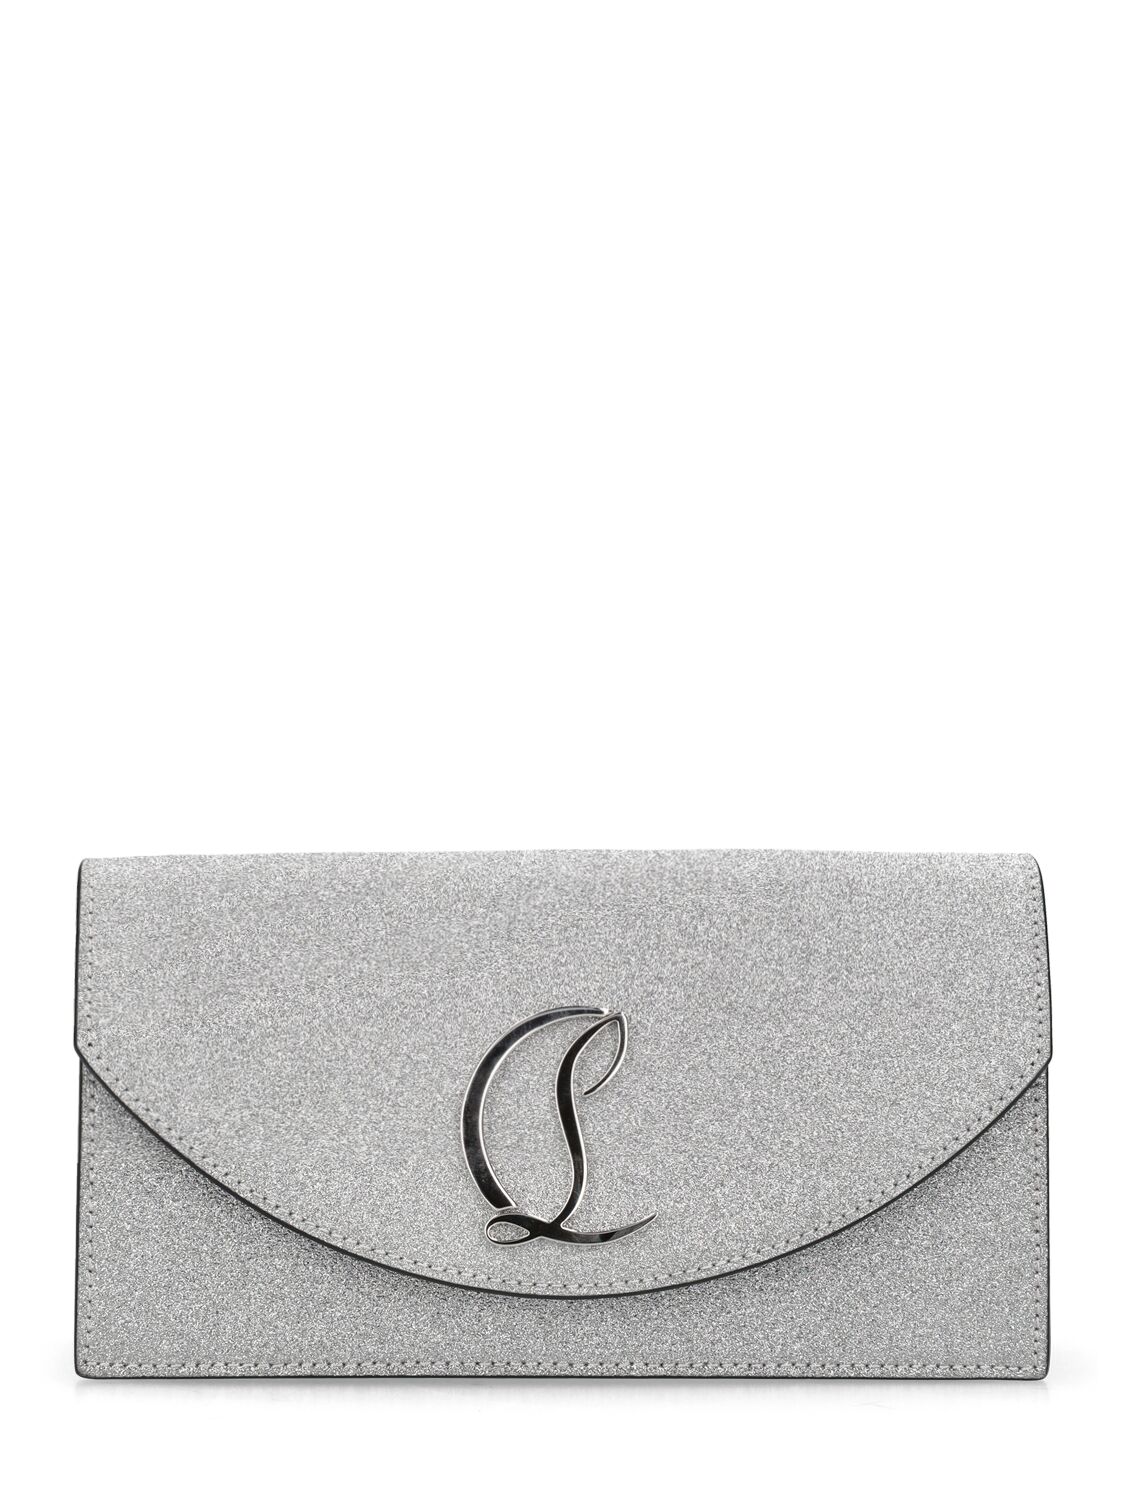 Image of Small Logo Glittered Leather Clutch